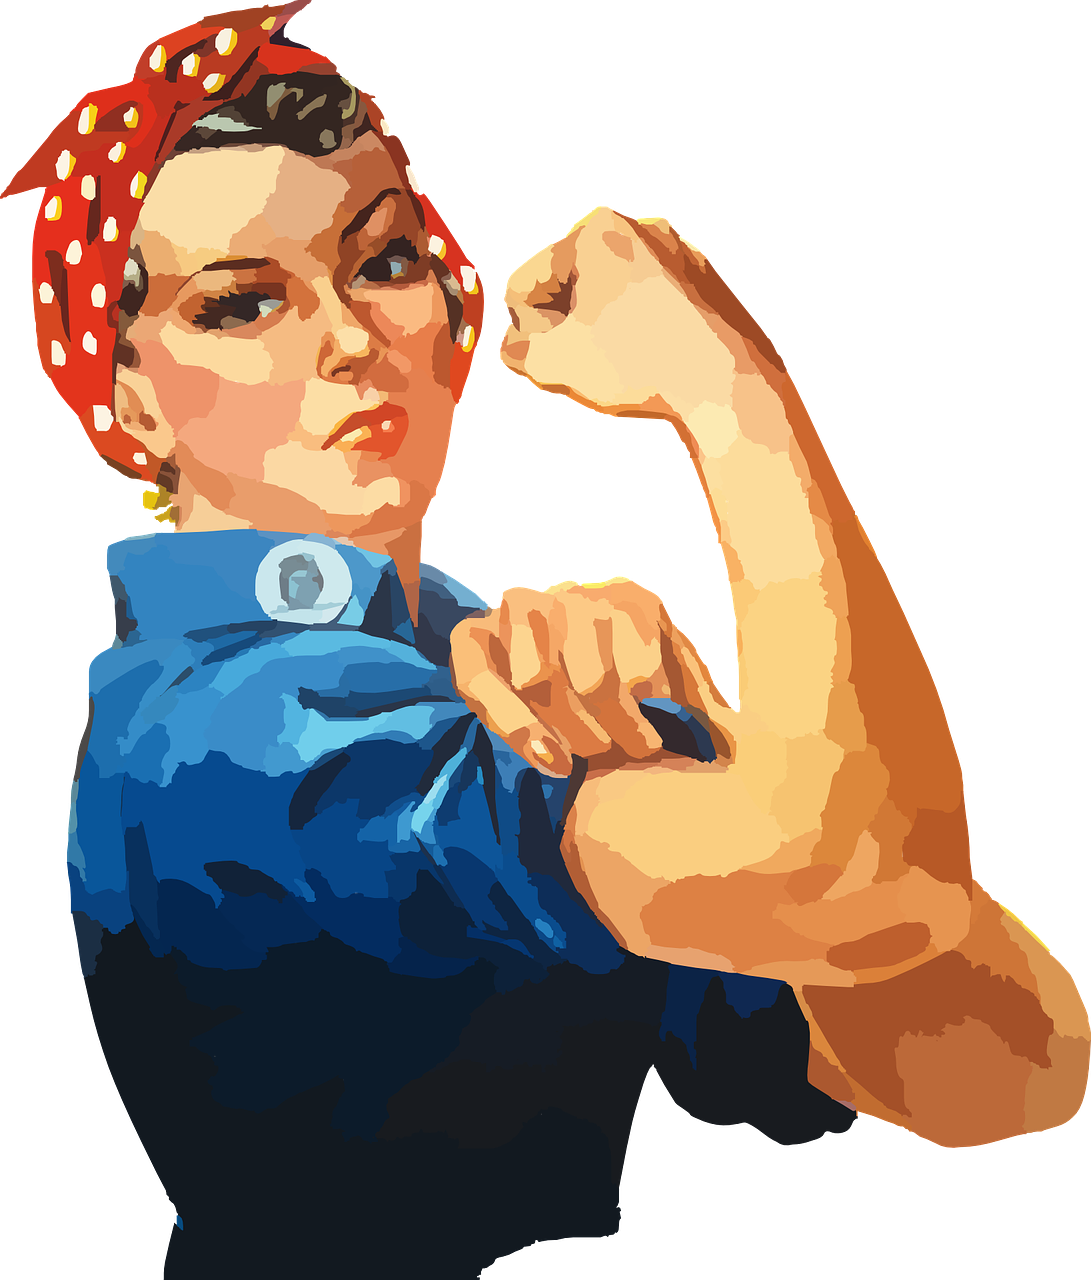 Rosie the Riveter; image by Clker Free Vector Images, via Pixabay.com.